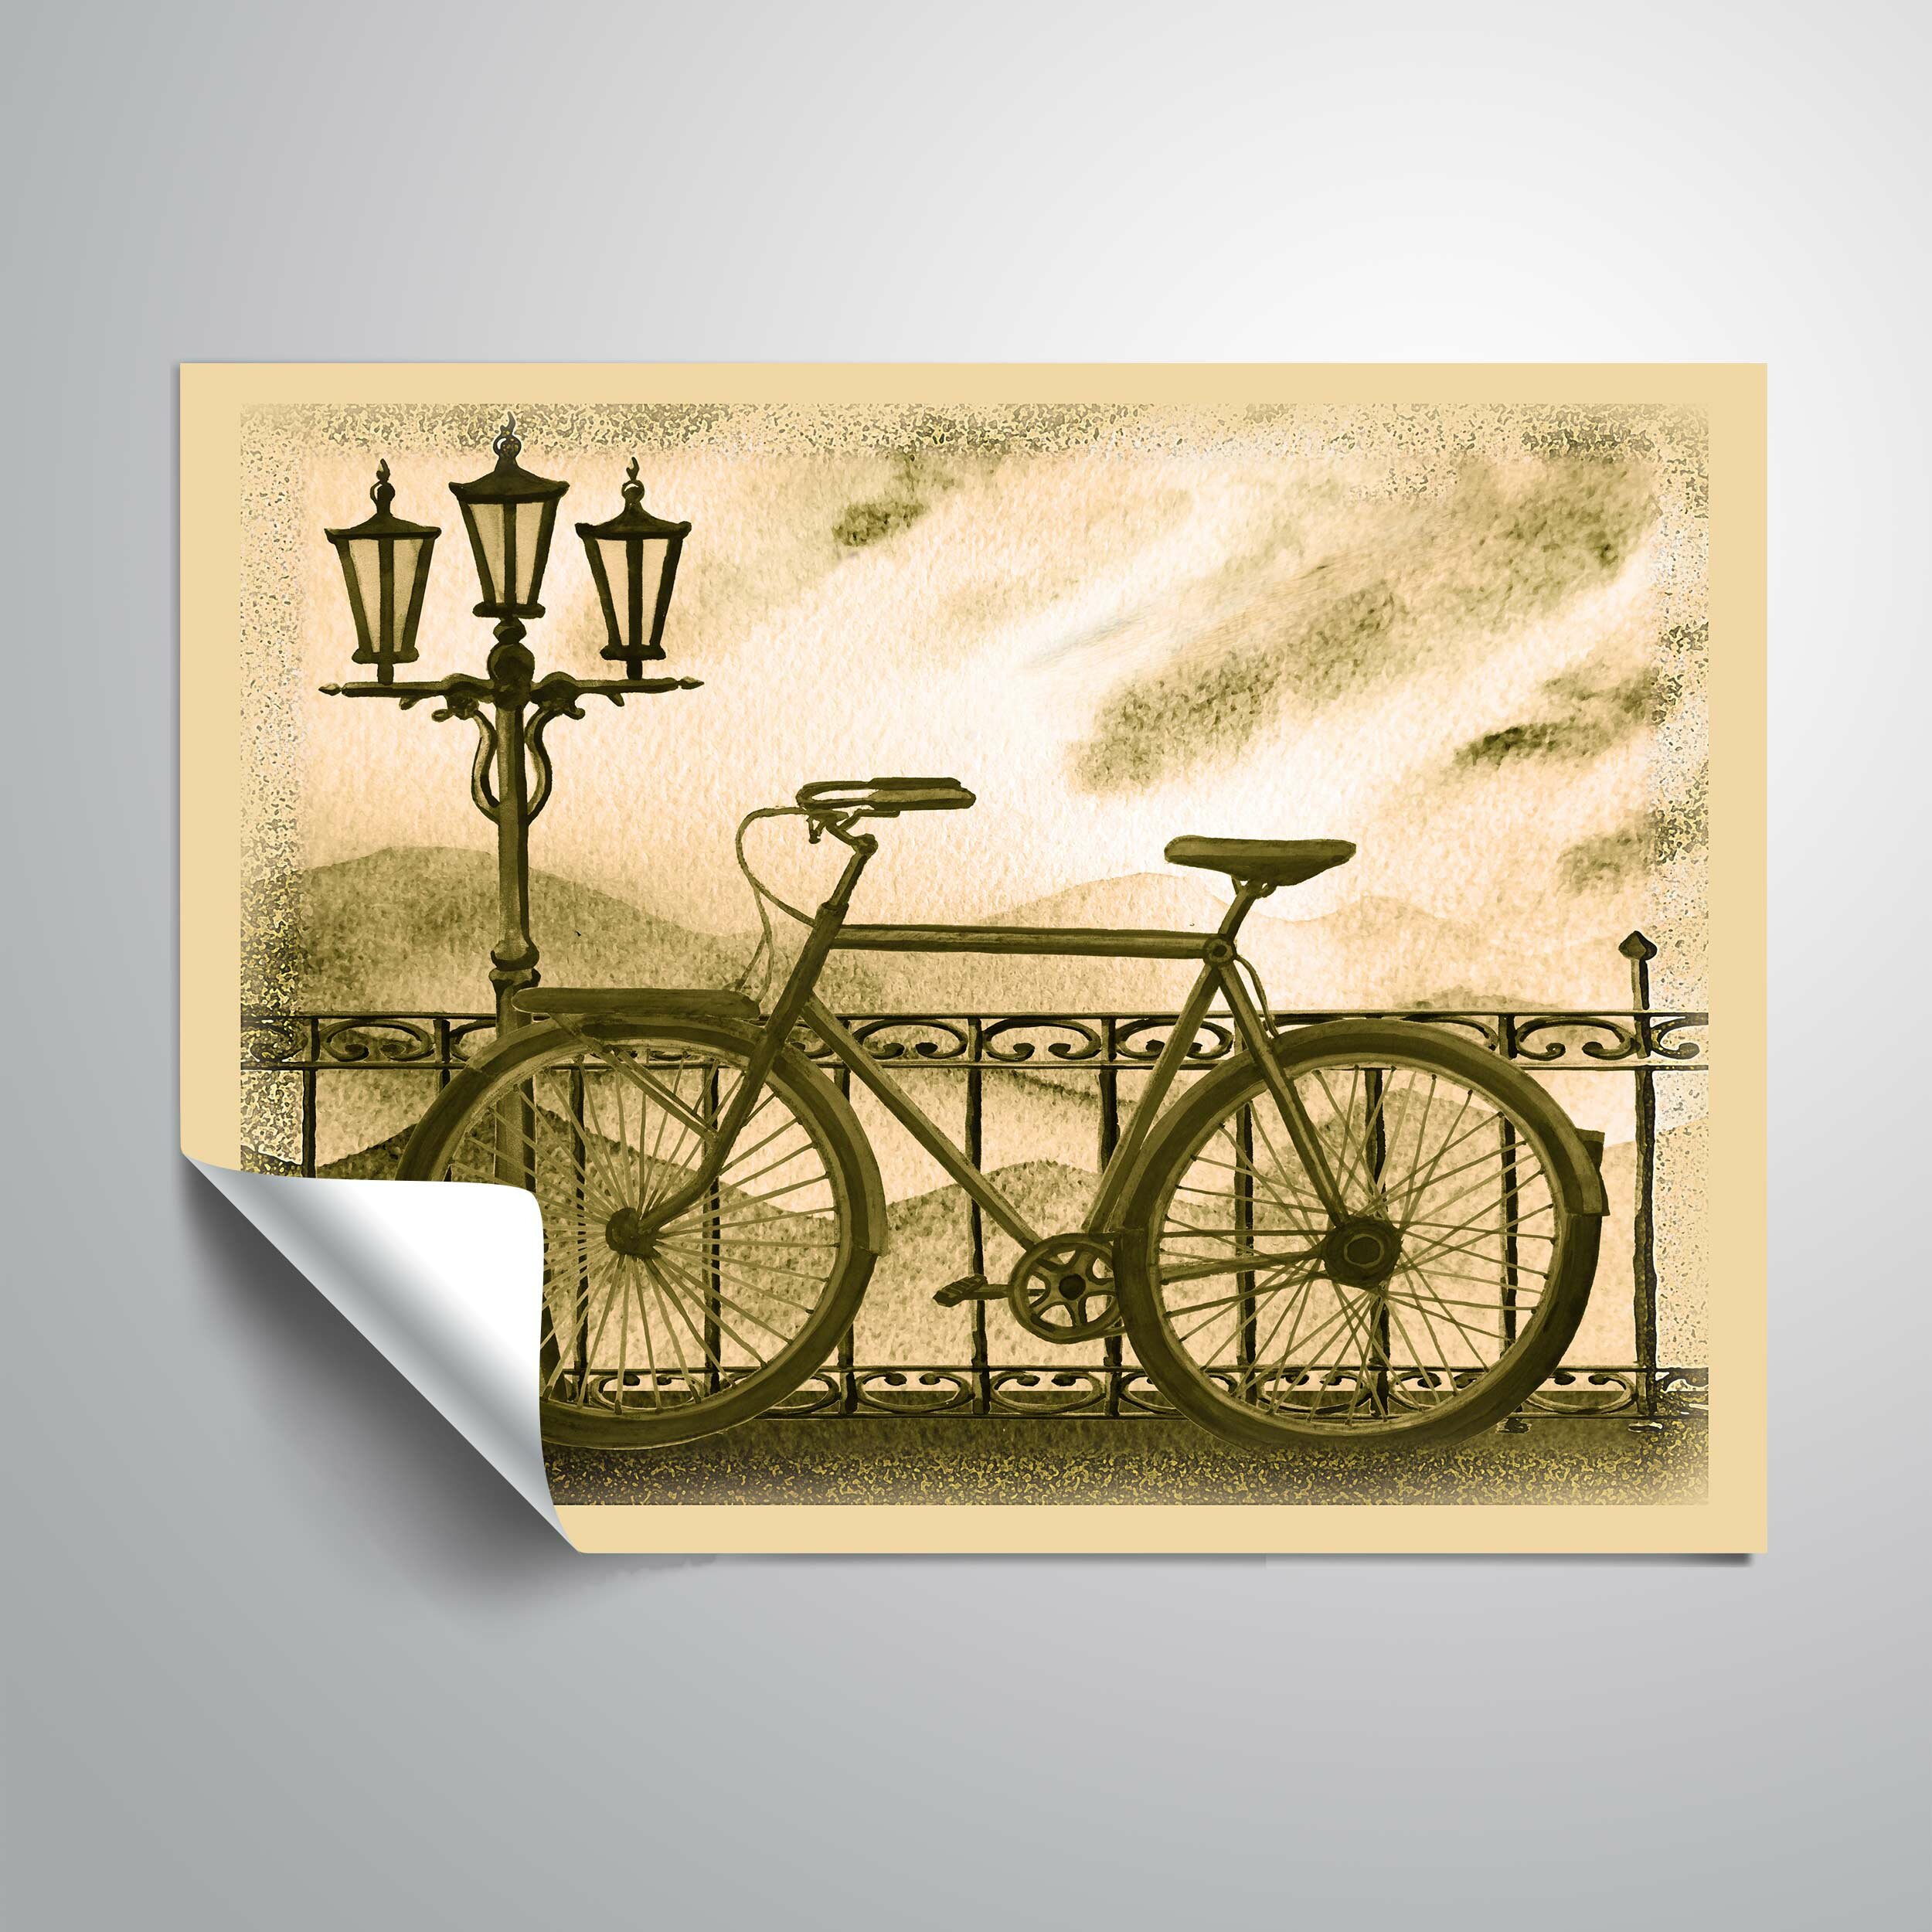 Vintage Bicycle Wall Decal removable bike sticker decor mural art retro 